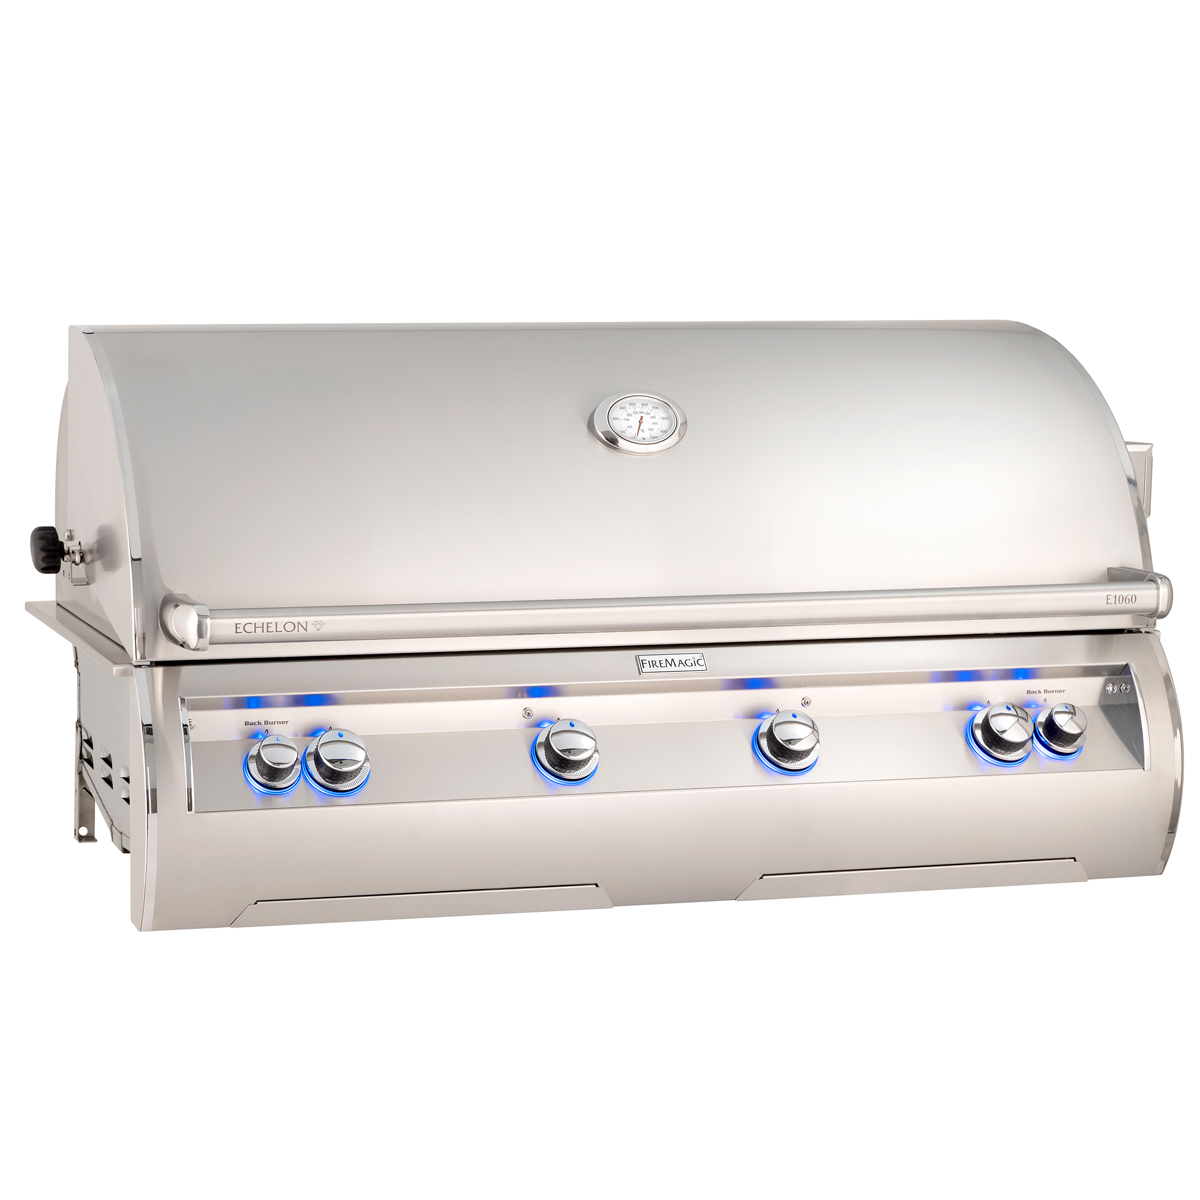 Echelon E1060i Built In Grill - Analog Thermometer - Fire Magic Grills